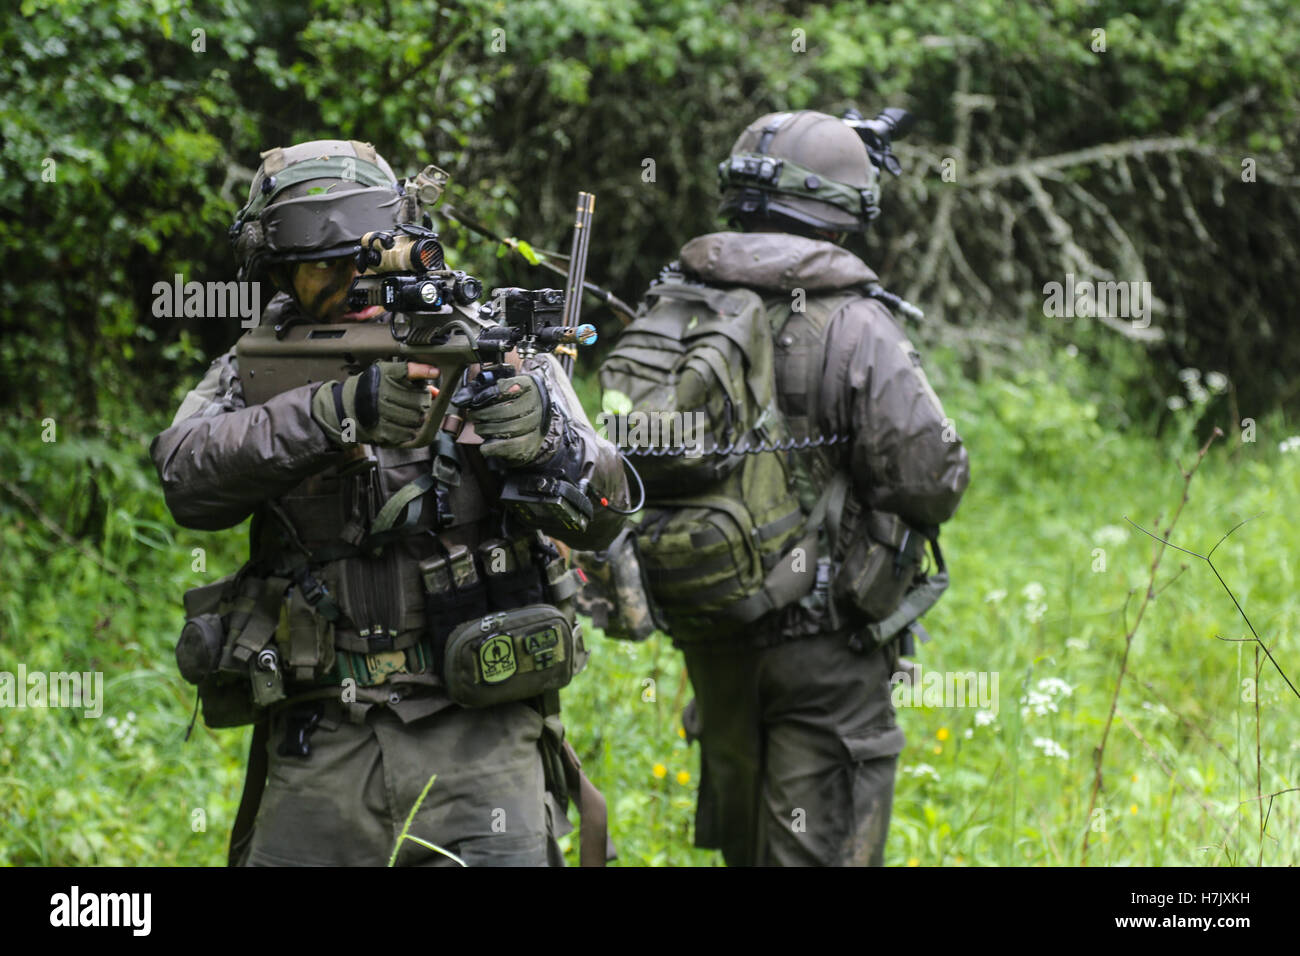 Austrian soldiers patrol during Combined Resolve II action training exercise at the Joint Multinational Readiness Center May 29, 2014 in Hohenfels, Germany. Stock Photo